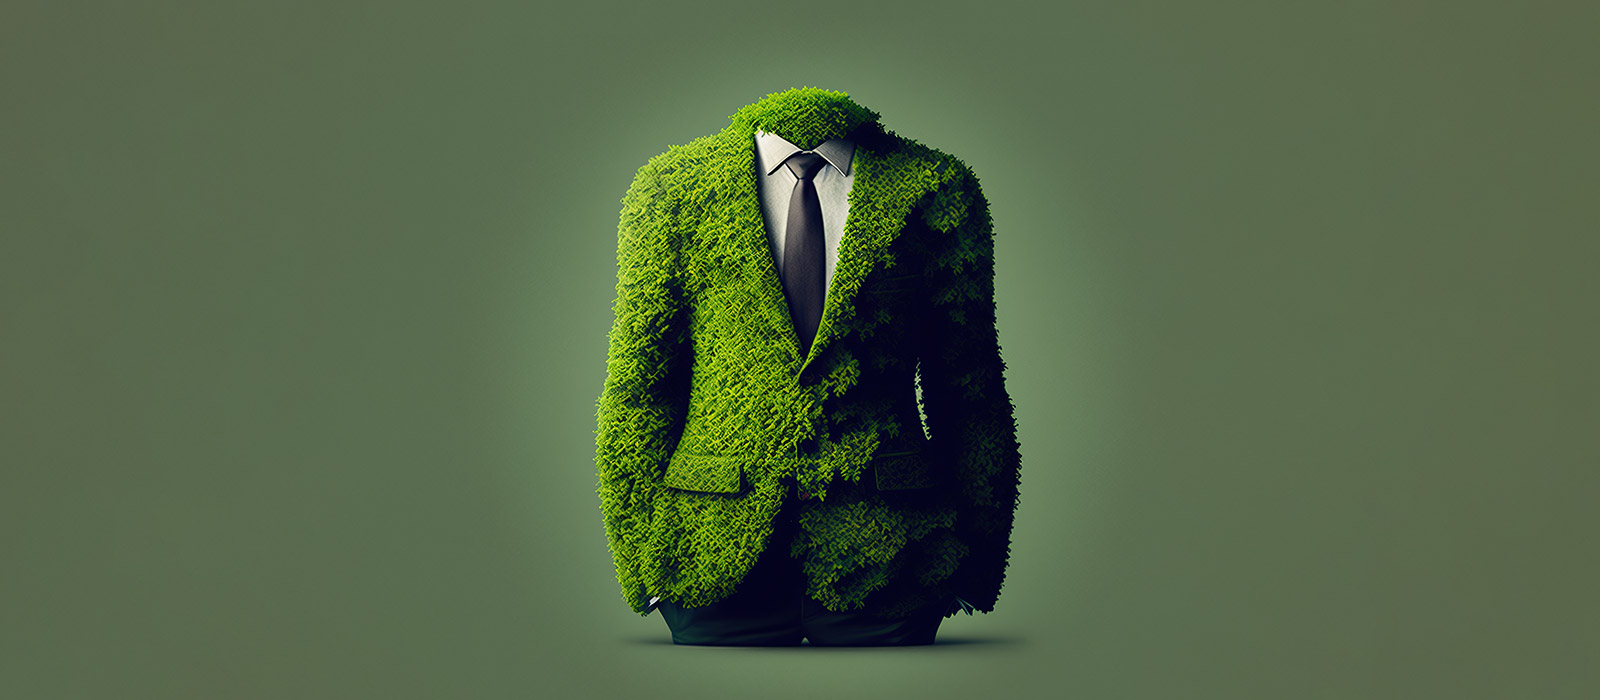 First View - Tree Huggers disguised in suits